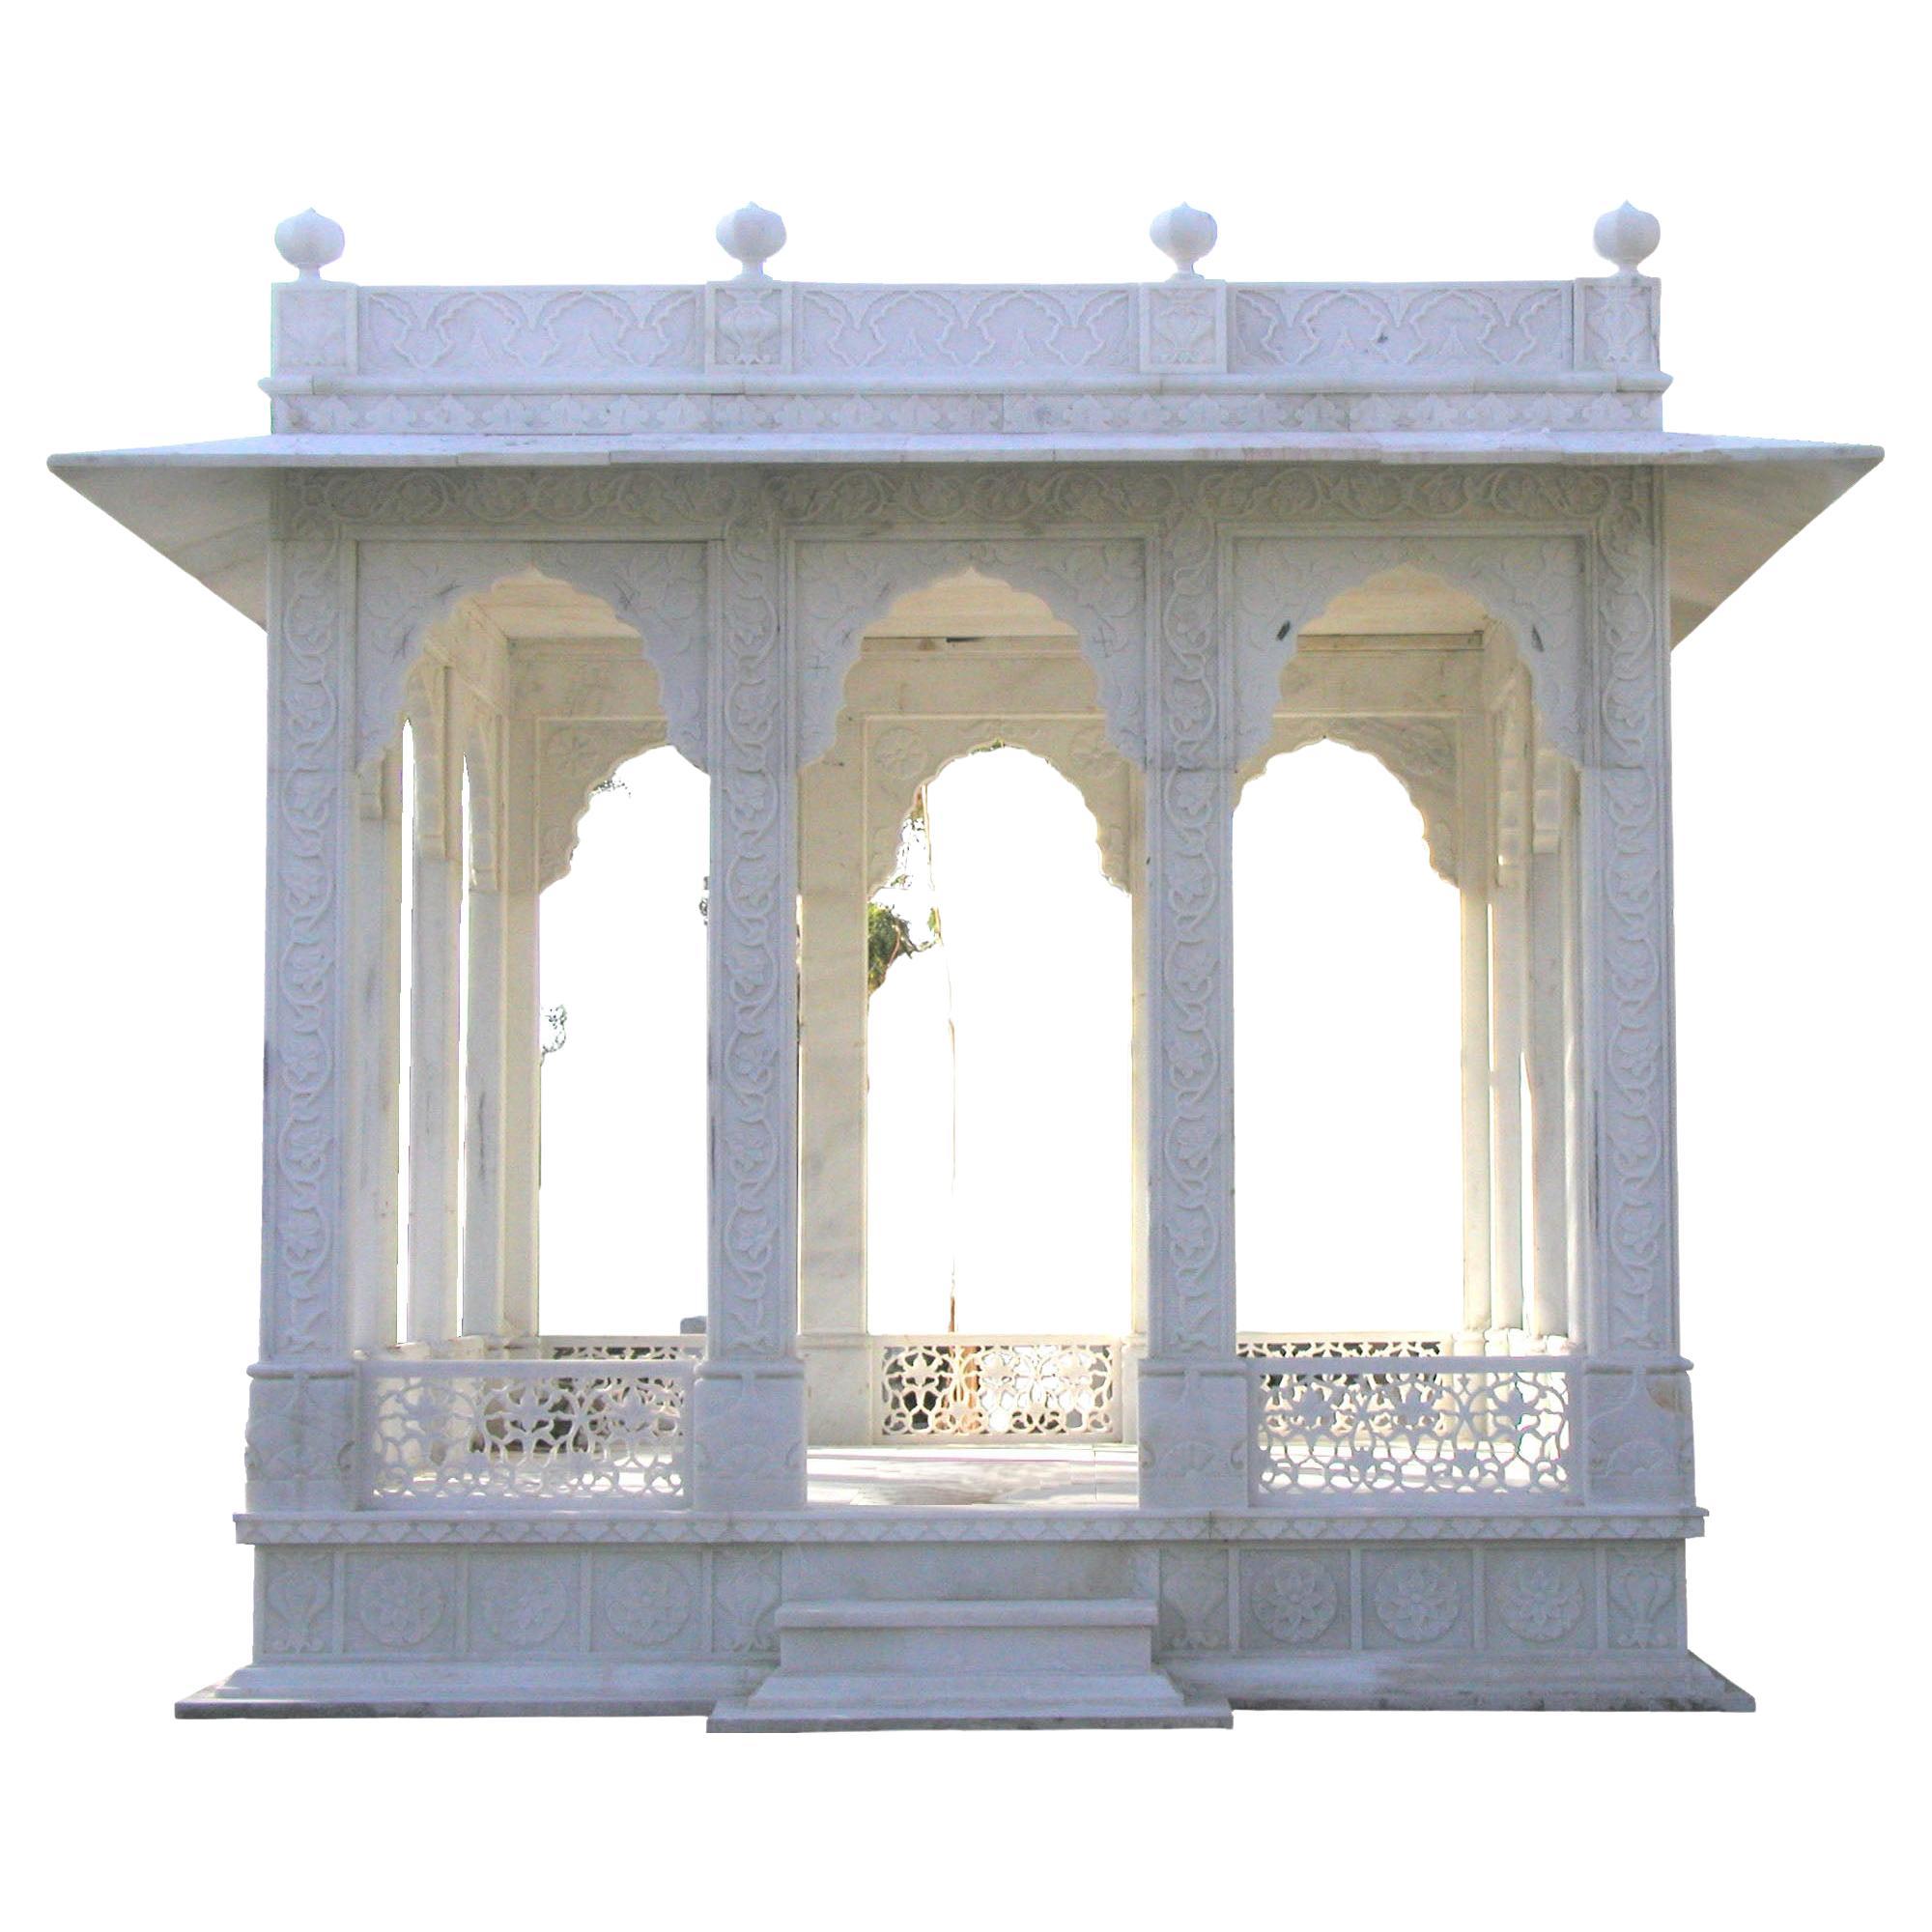 Baradari in White Marble Handcrafted in India For Sale